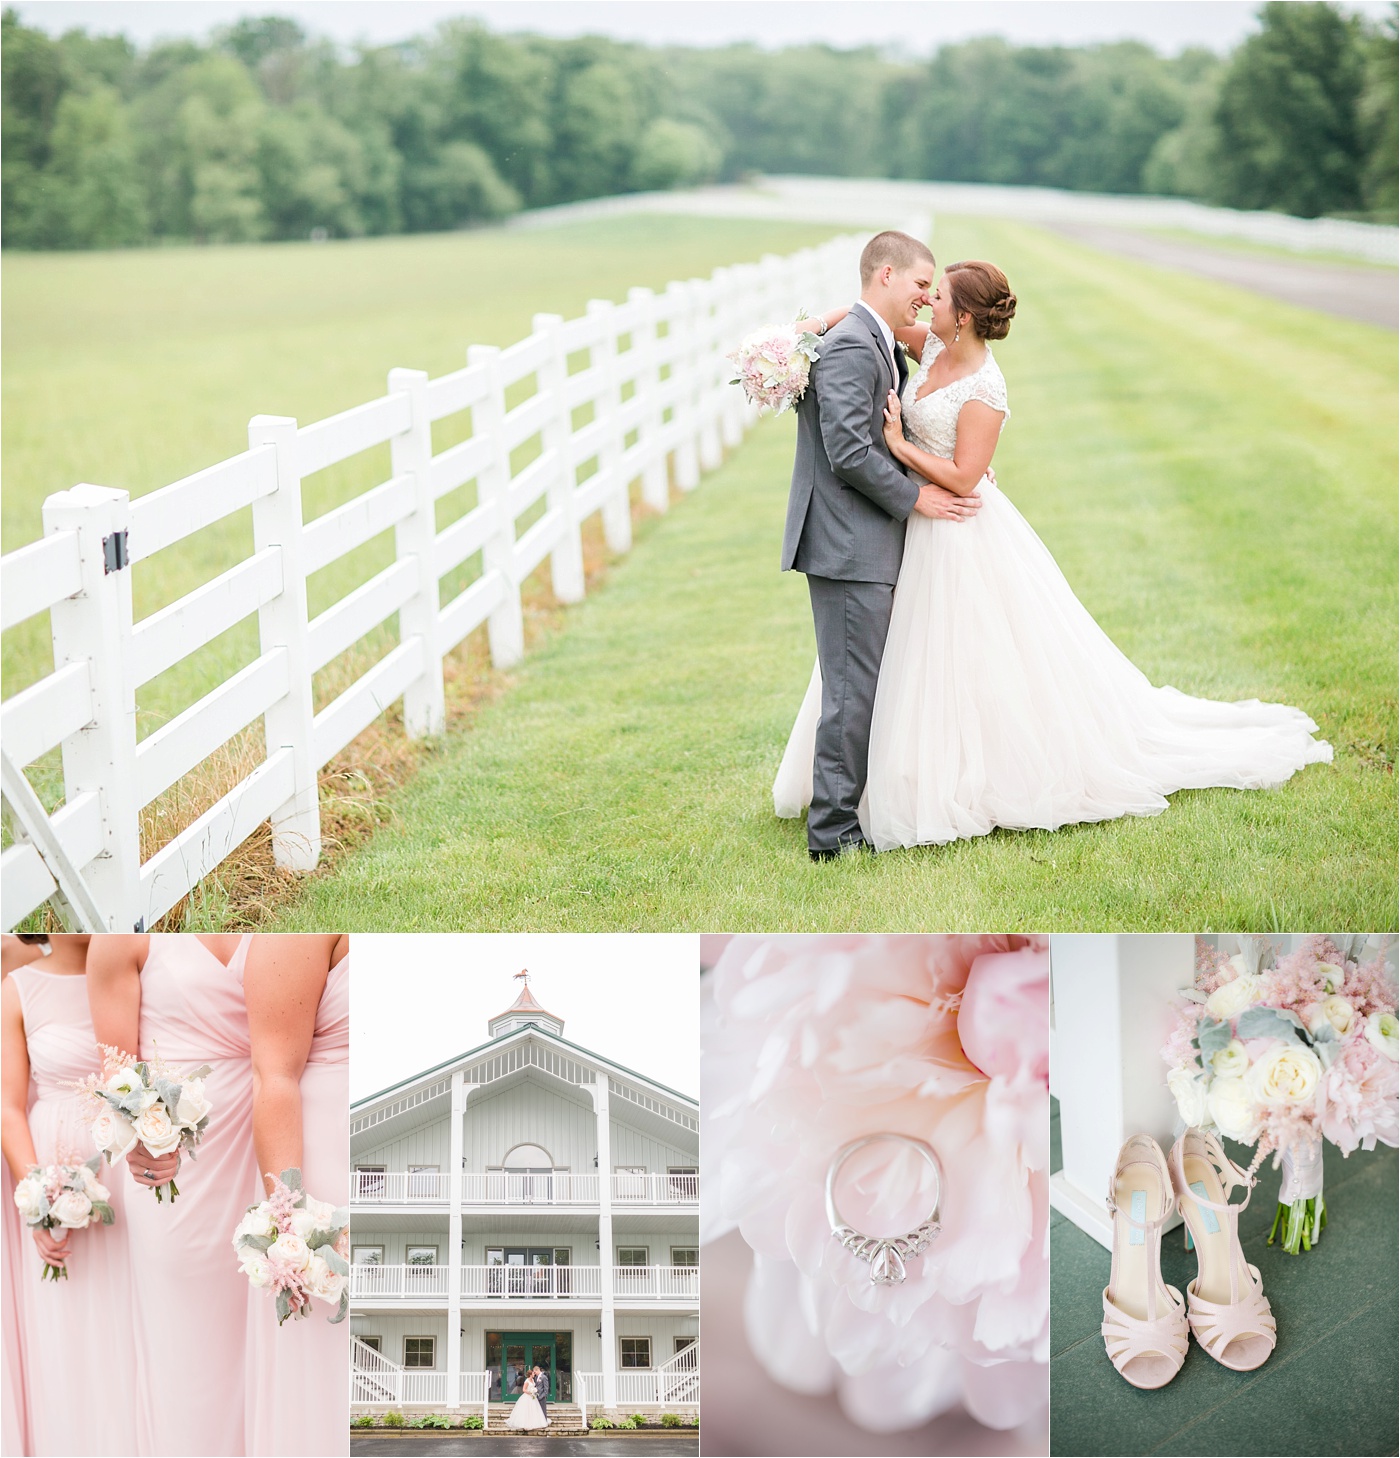 A Blush Outdoor wedding at Irongate Equestrian | KariMe Photography_0001